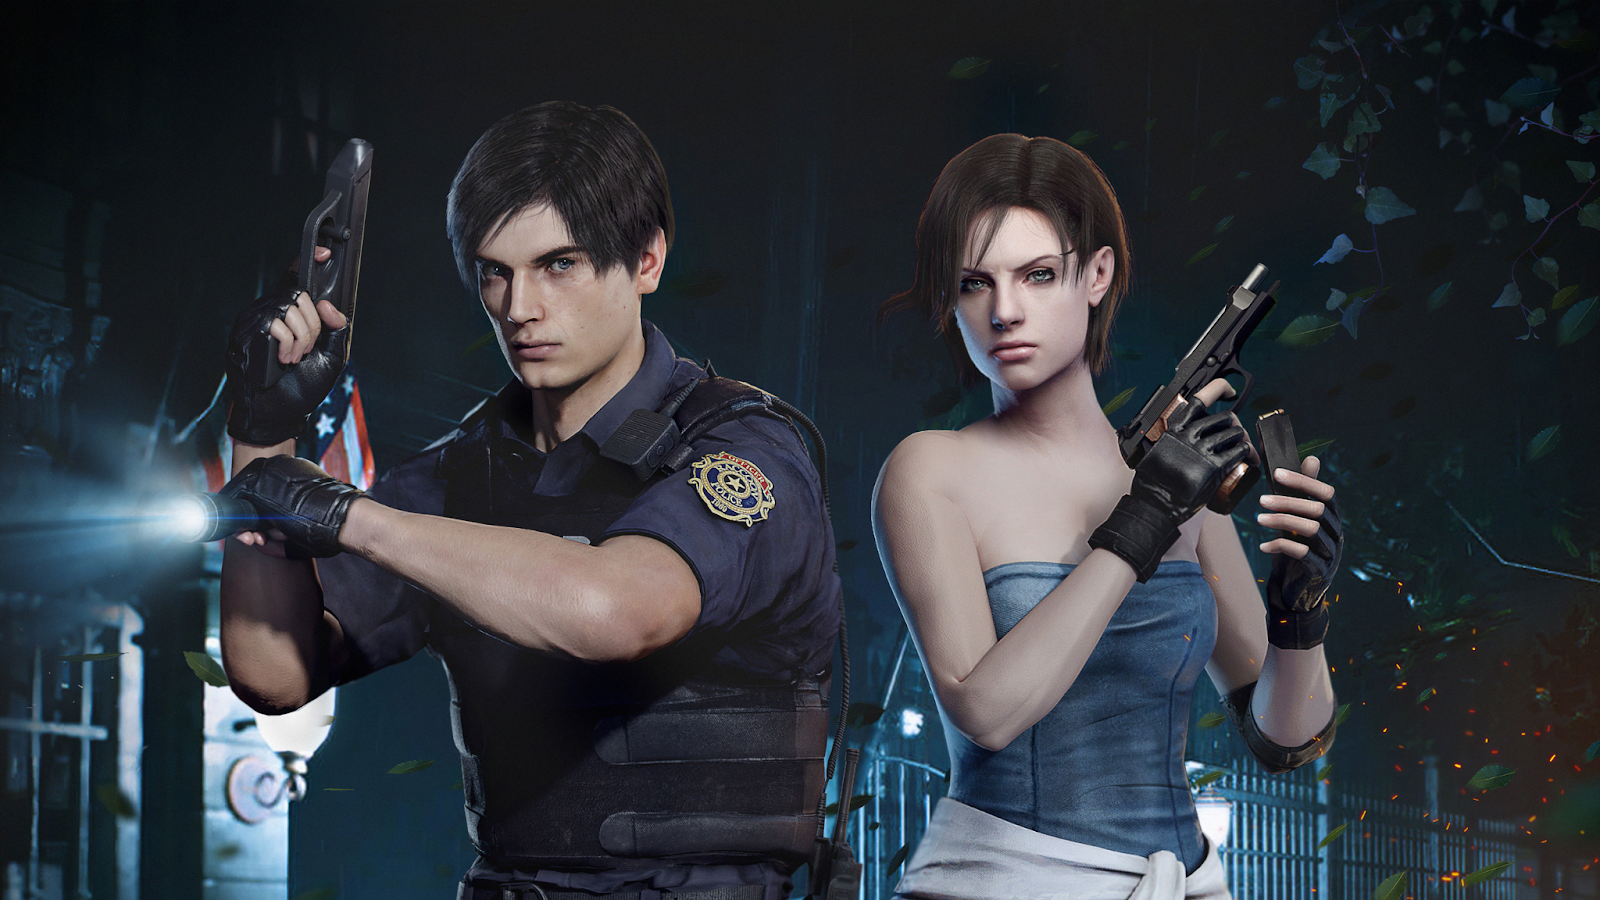 Leon Kennedy and Jill Valentine from Resident Evil.